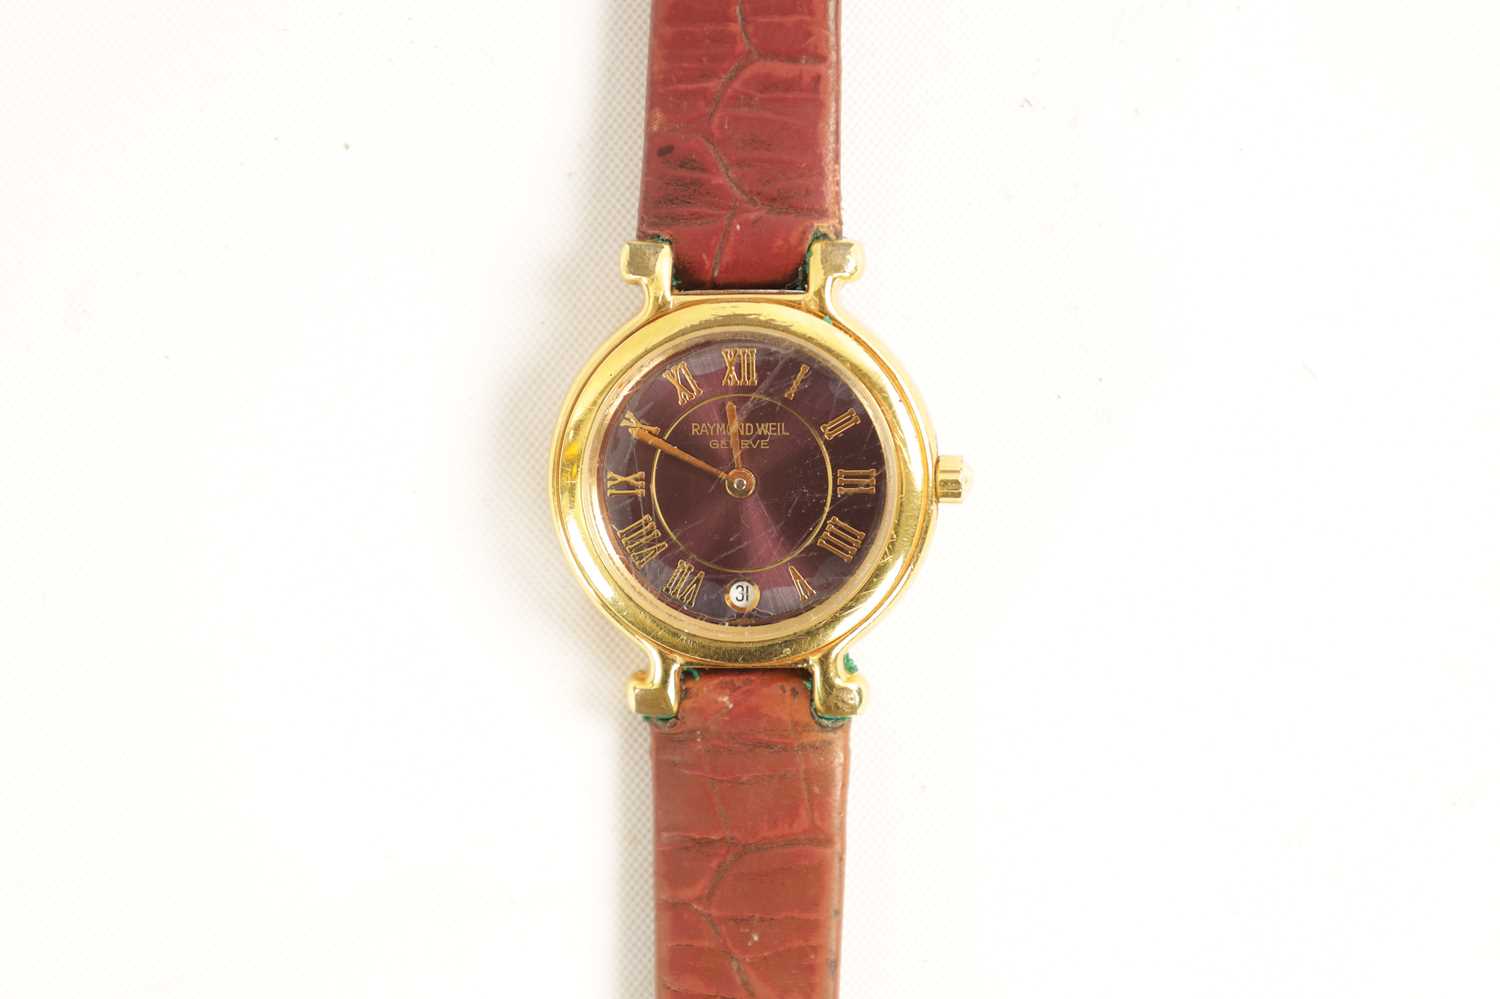 A RAYMOND WEIL 18CT GOLDPLATED LADIES WATCH PURPLE DIAL MODEL 9936 - Image 2 of 9